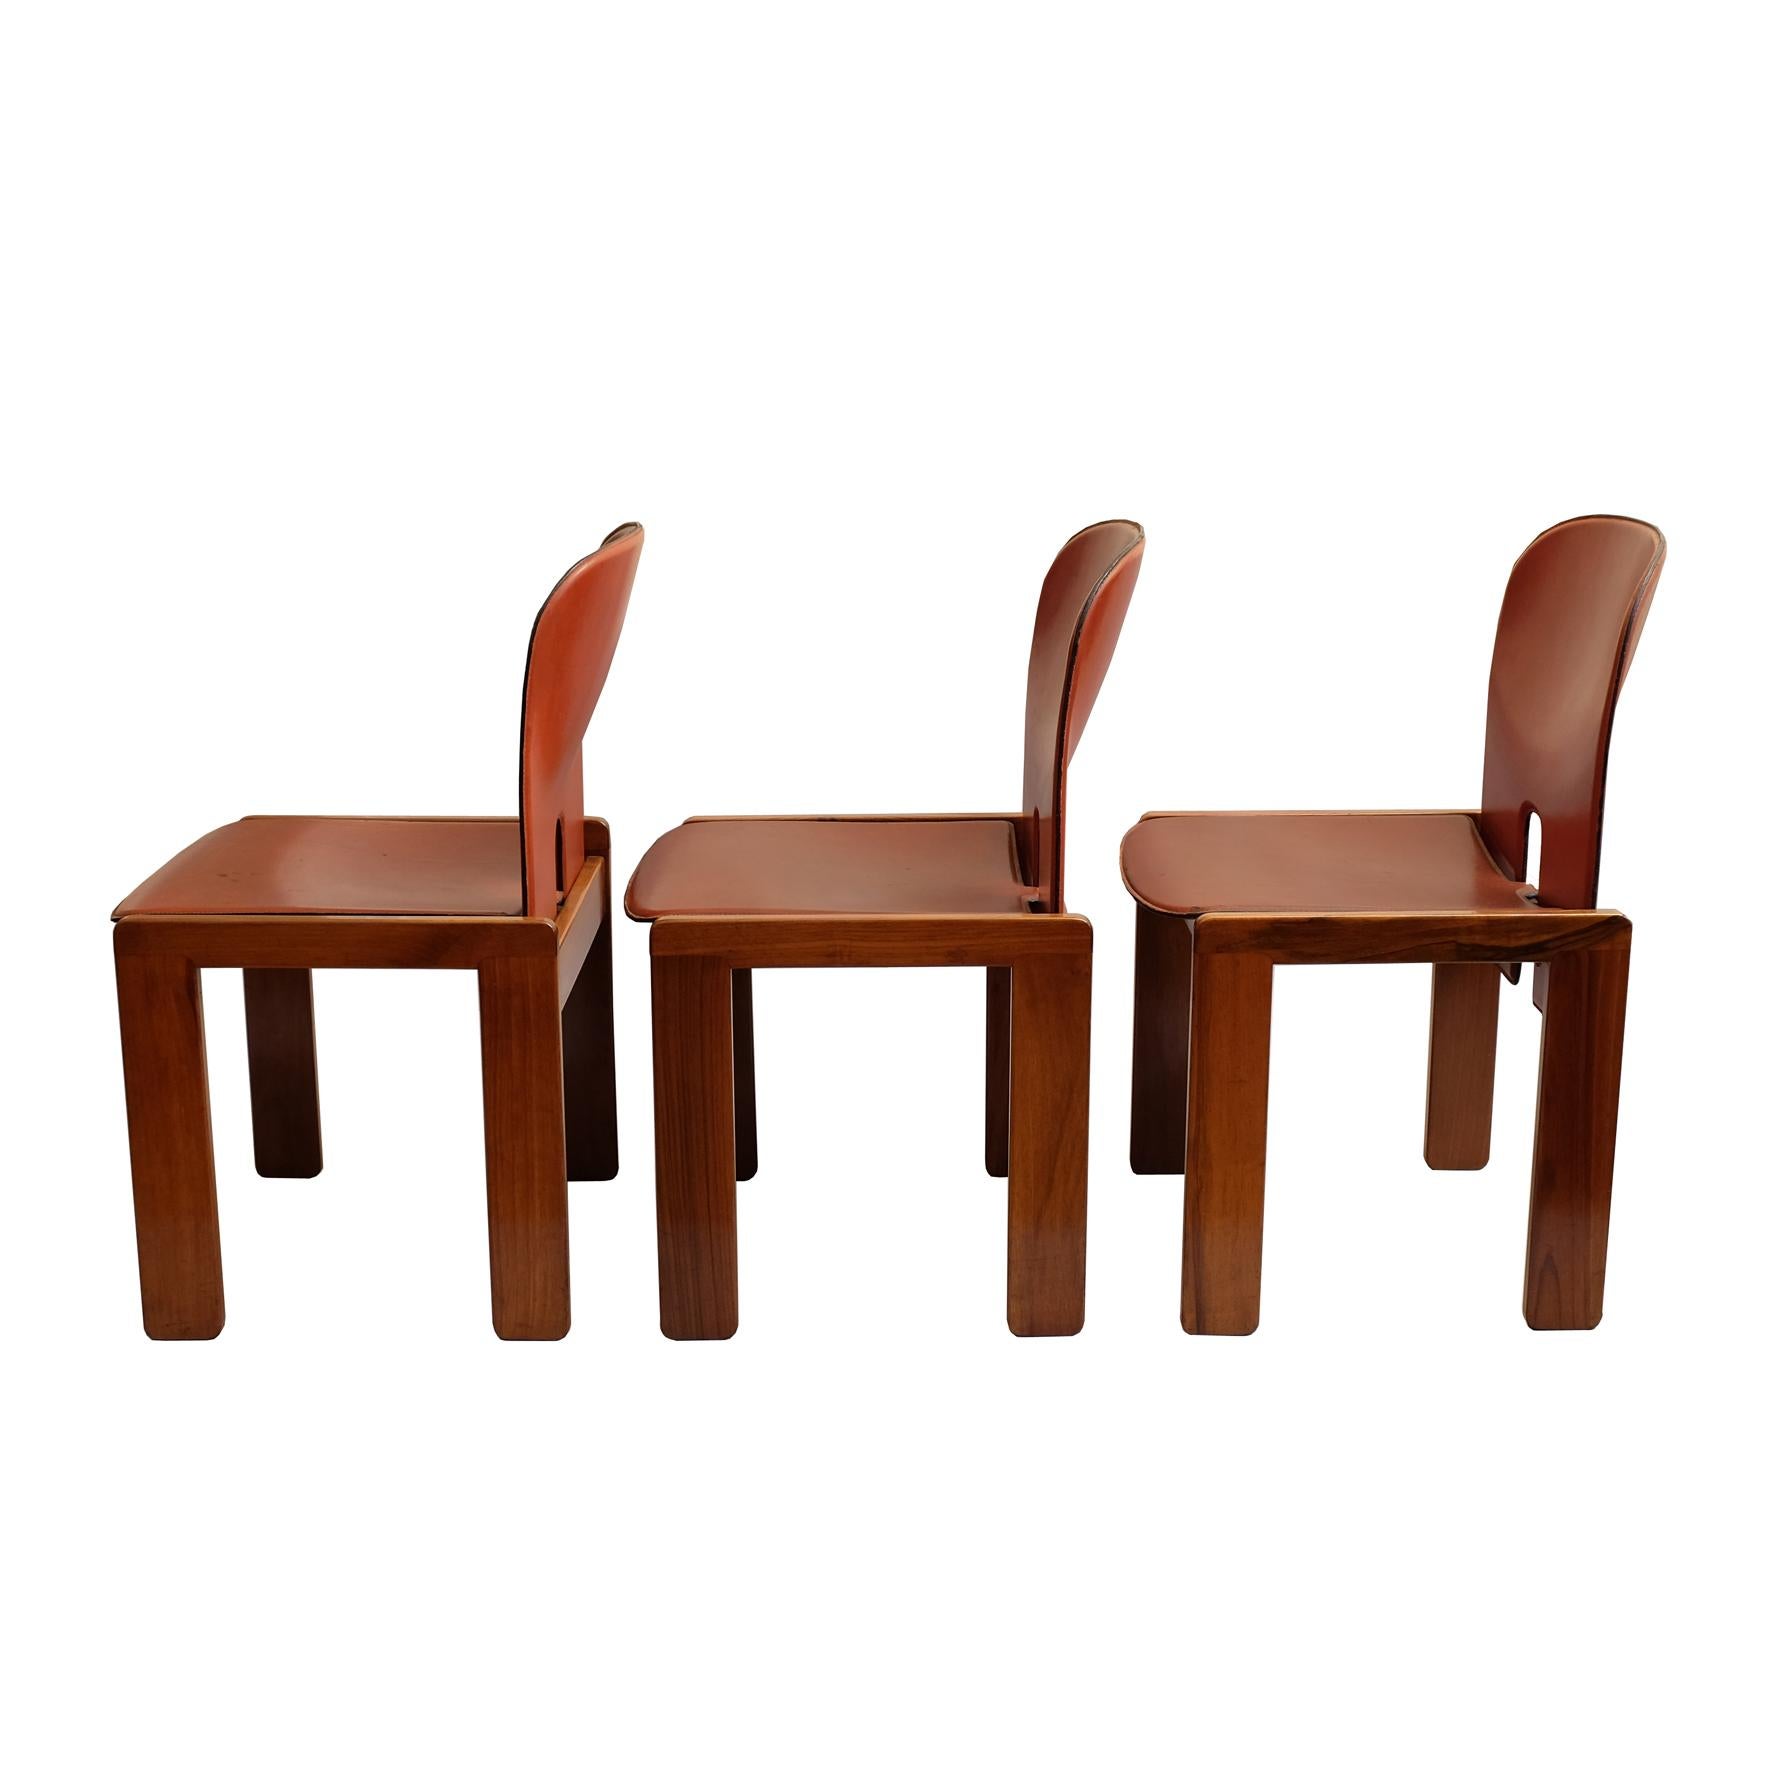 Carved Afra & Tobia Scarpa, a Set of Six Chairs, Model 121, Cassina, 1960s